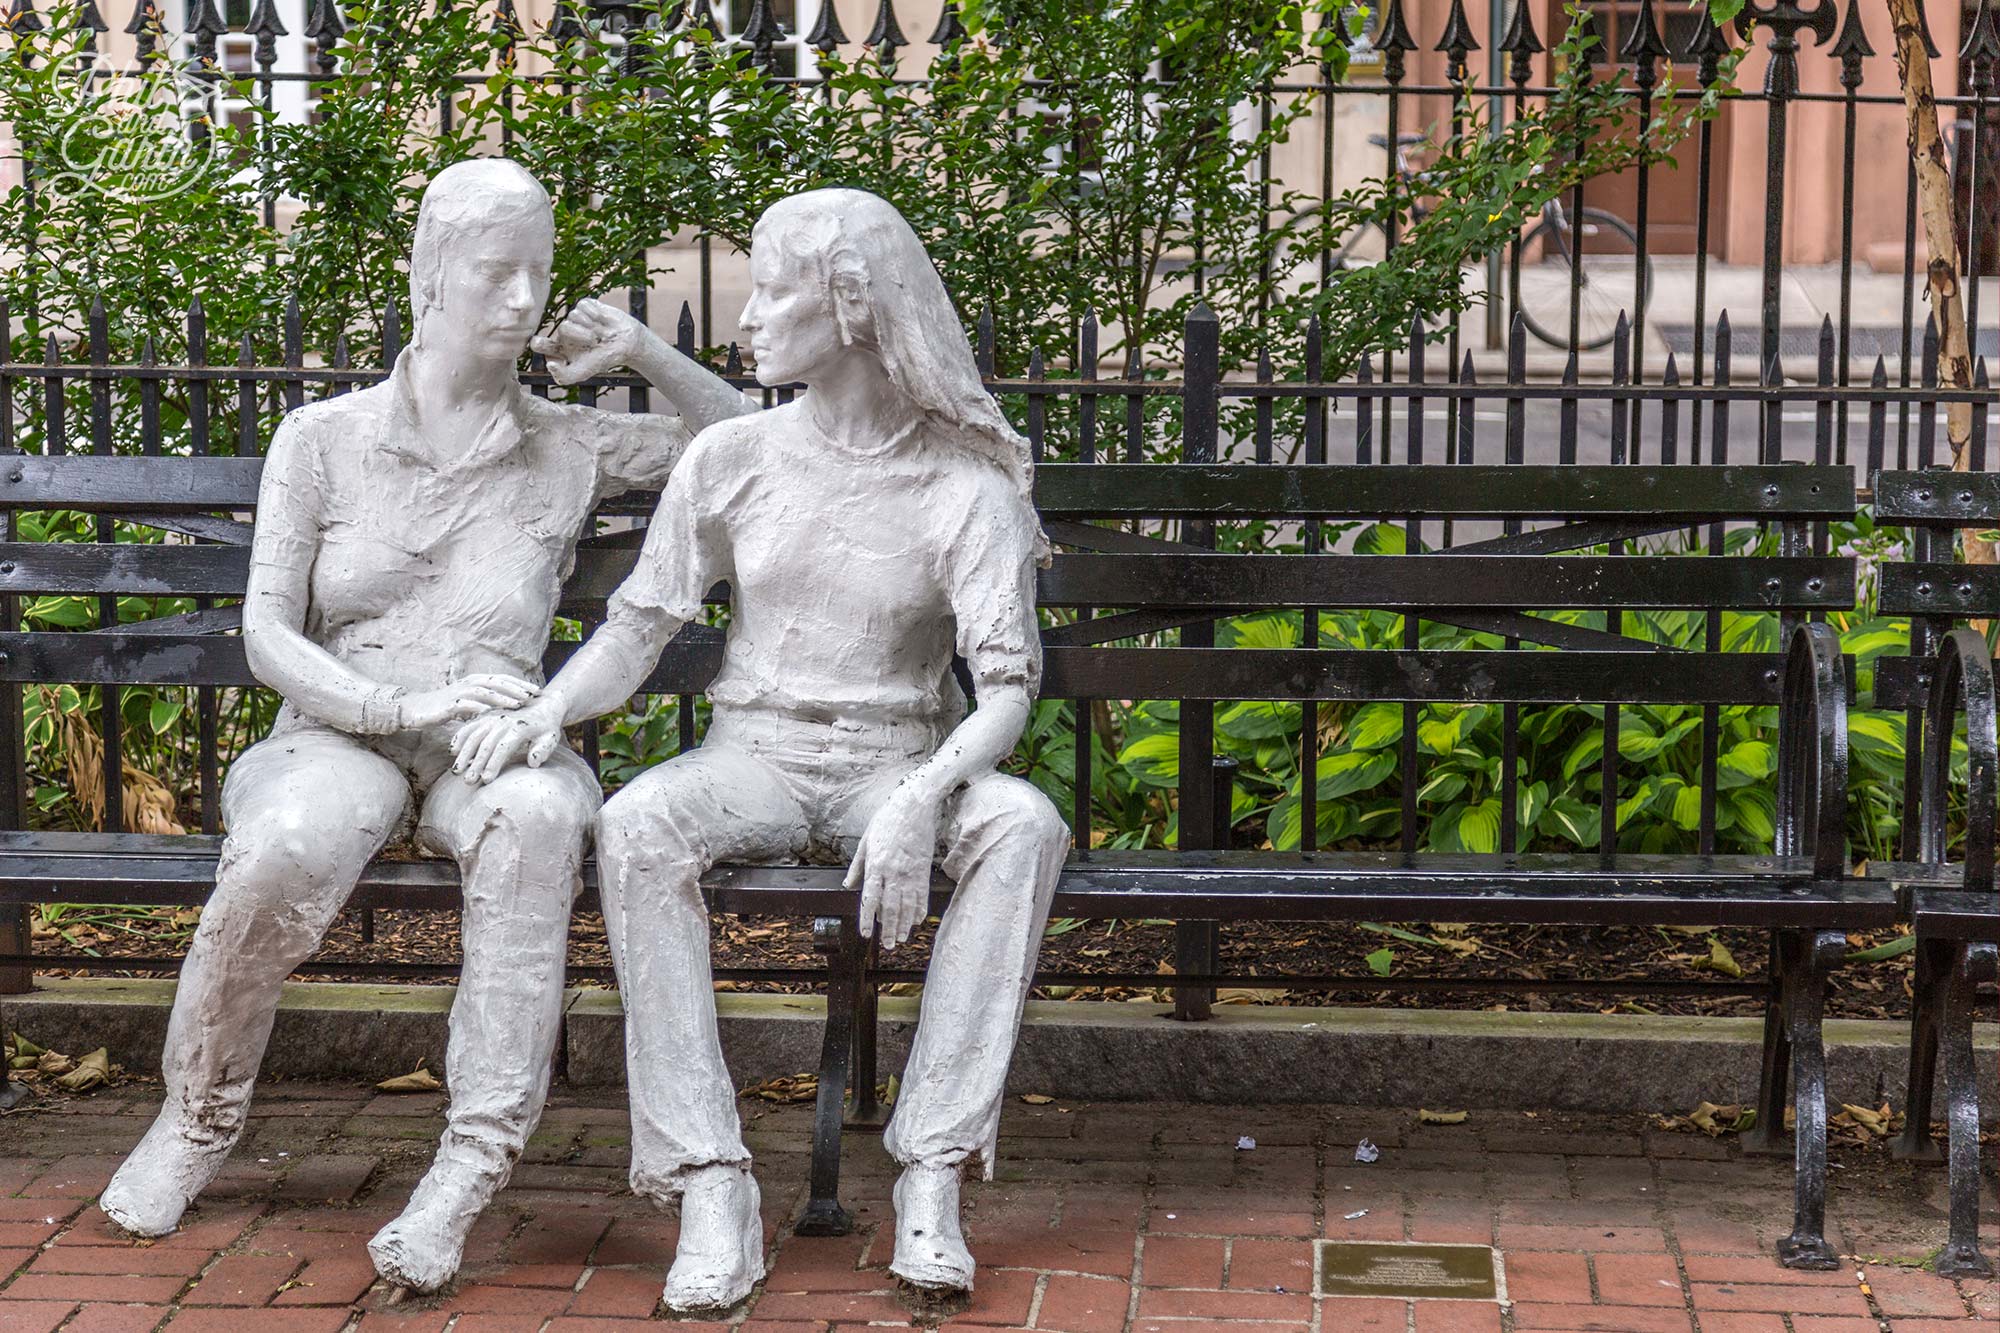 Opposite Stonewall - Christopher Street Park statues honour gay rights